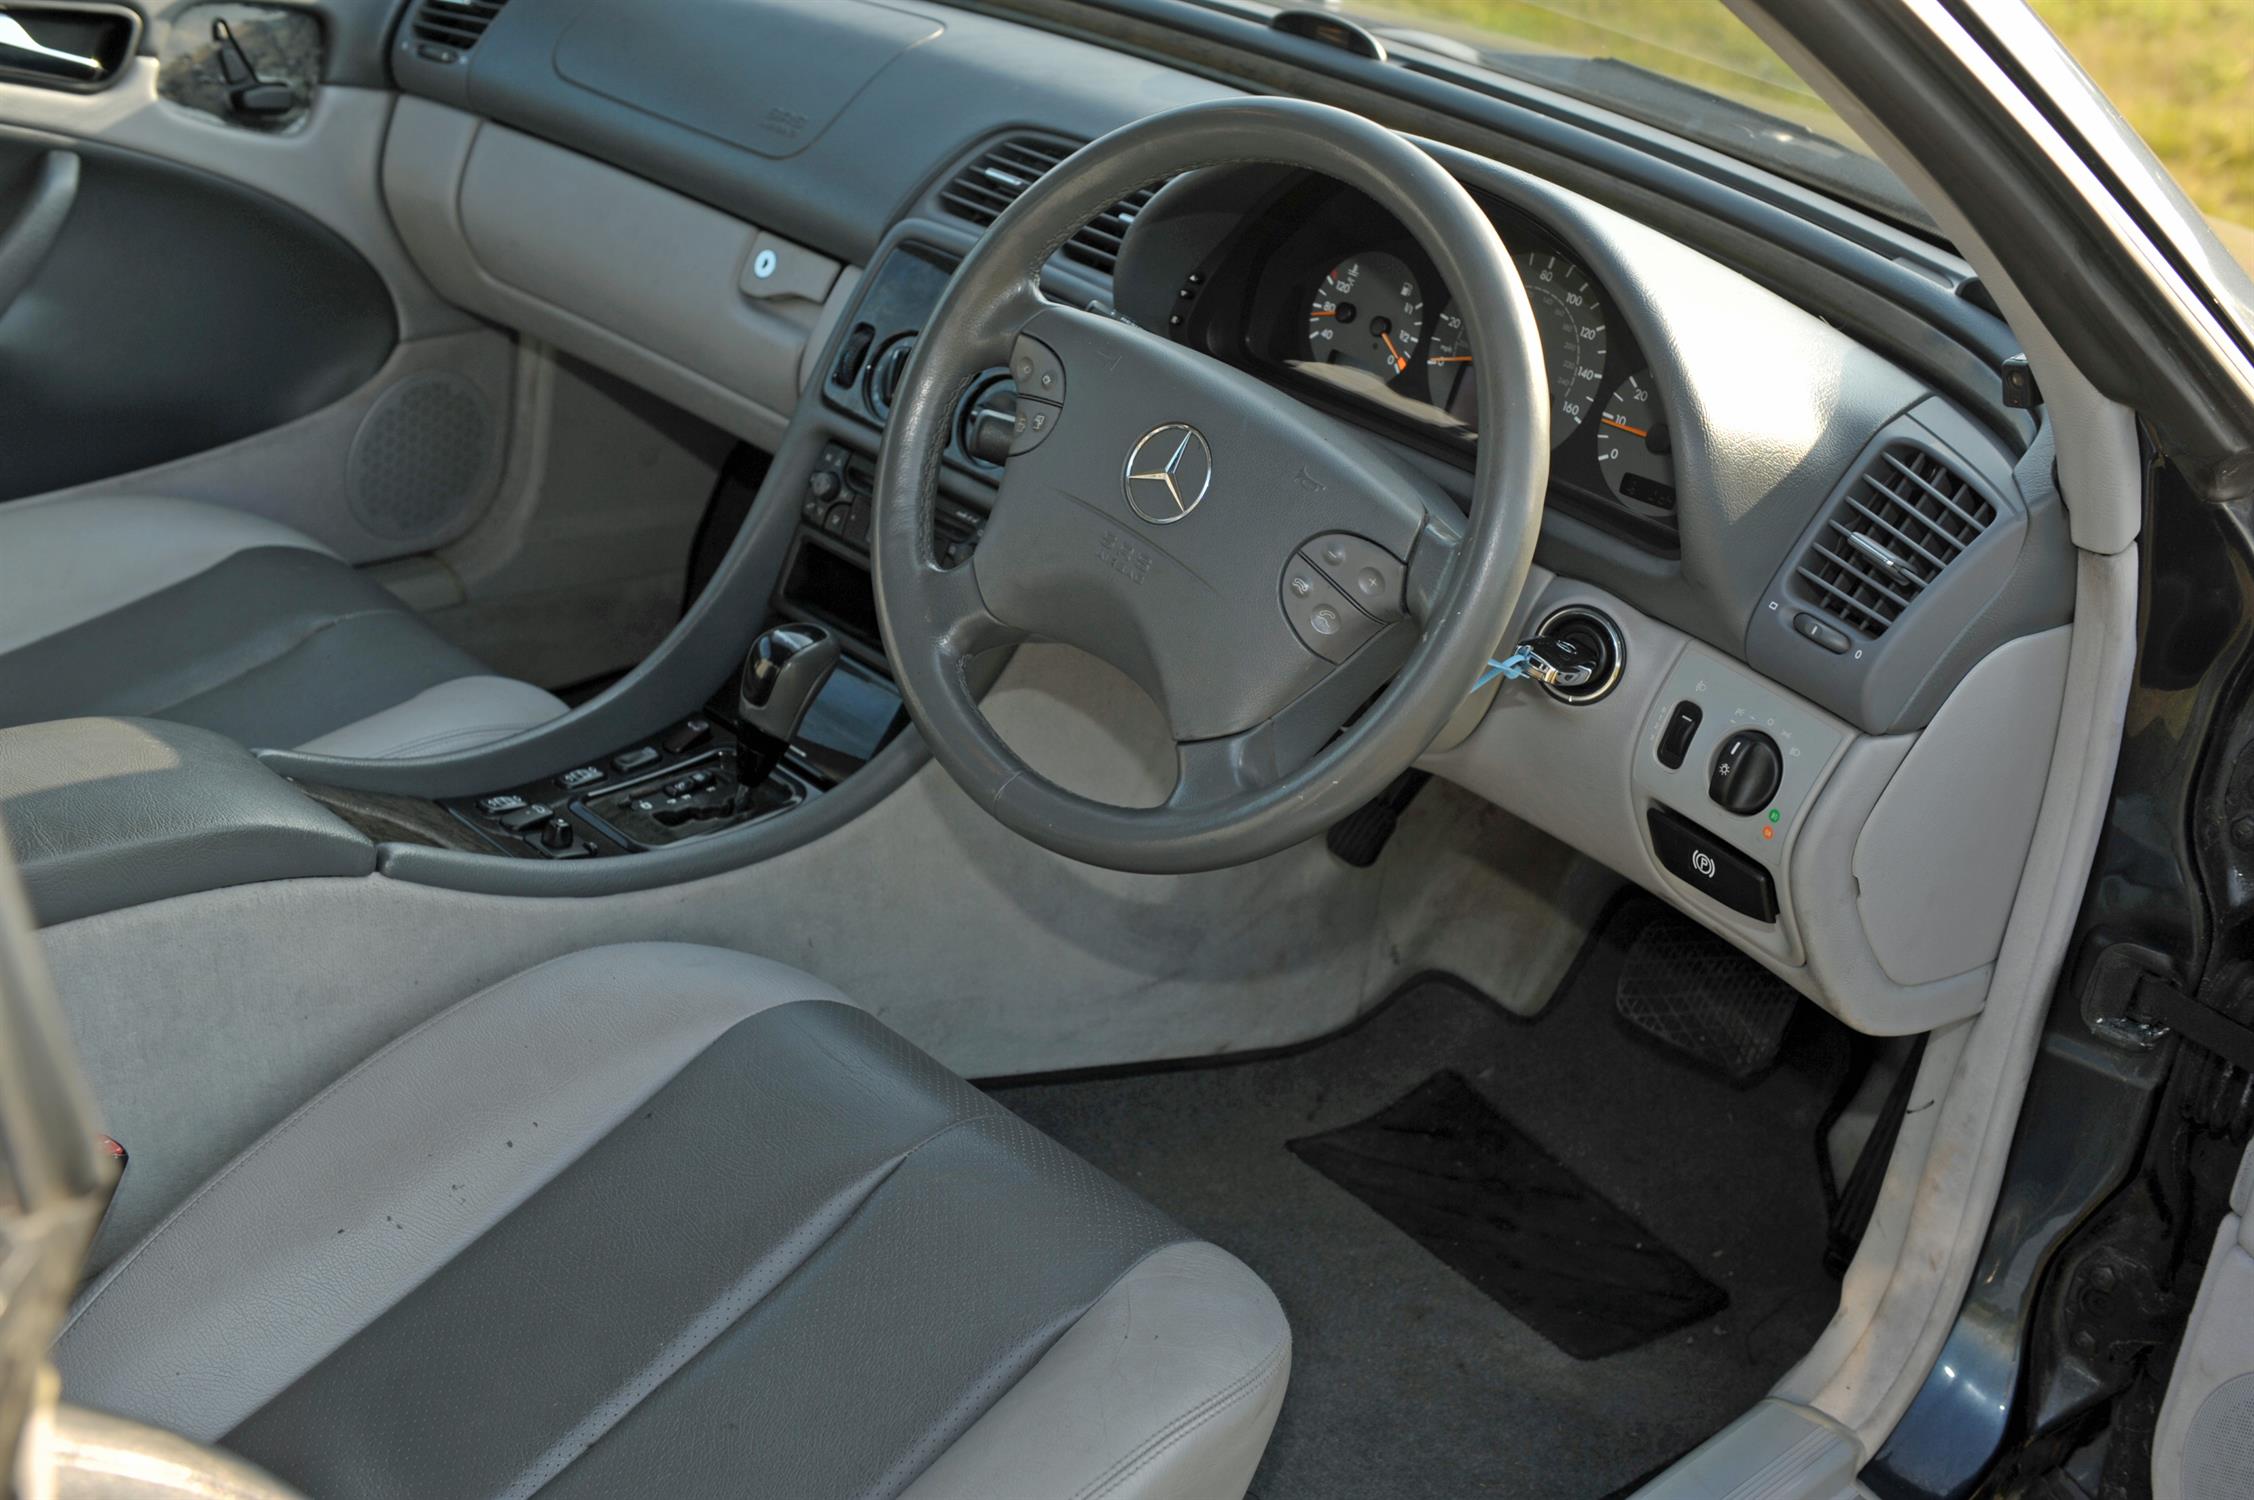 2001 Mercedes CLK 200 Petrol Convertible Automatic. Registration number: Y702 HAP. - Image 8 of 21